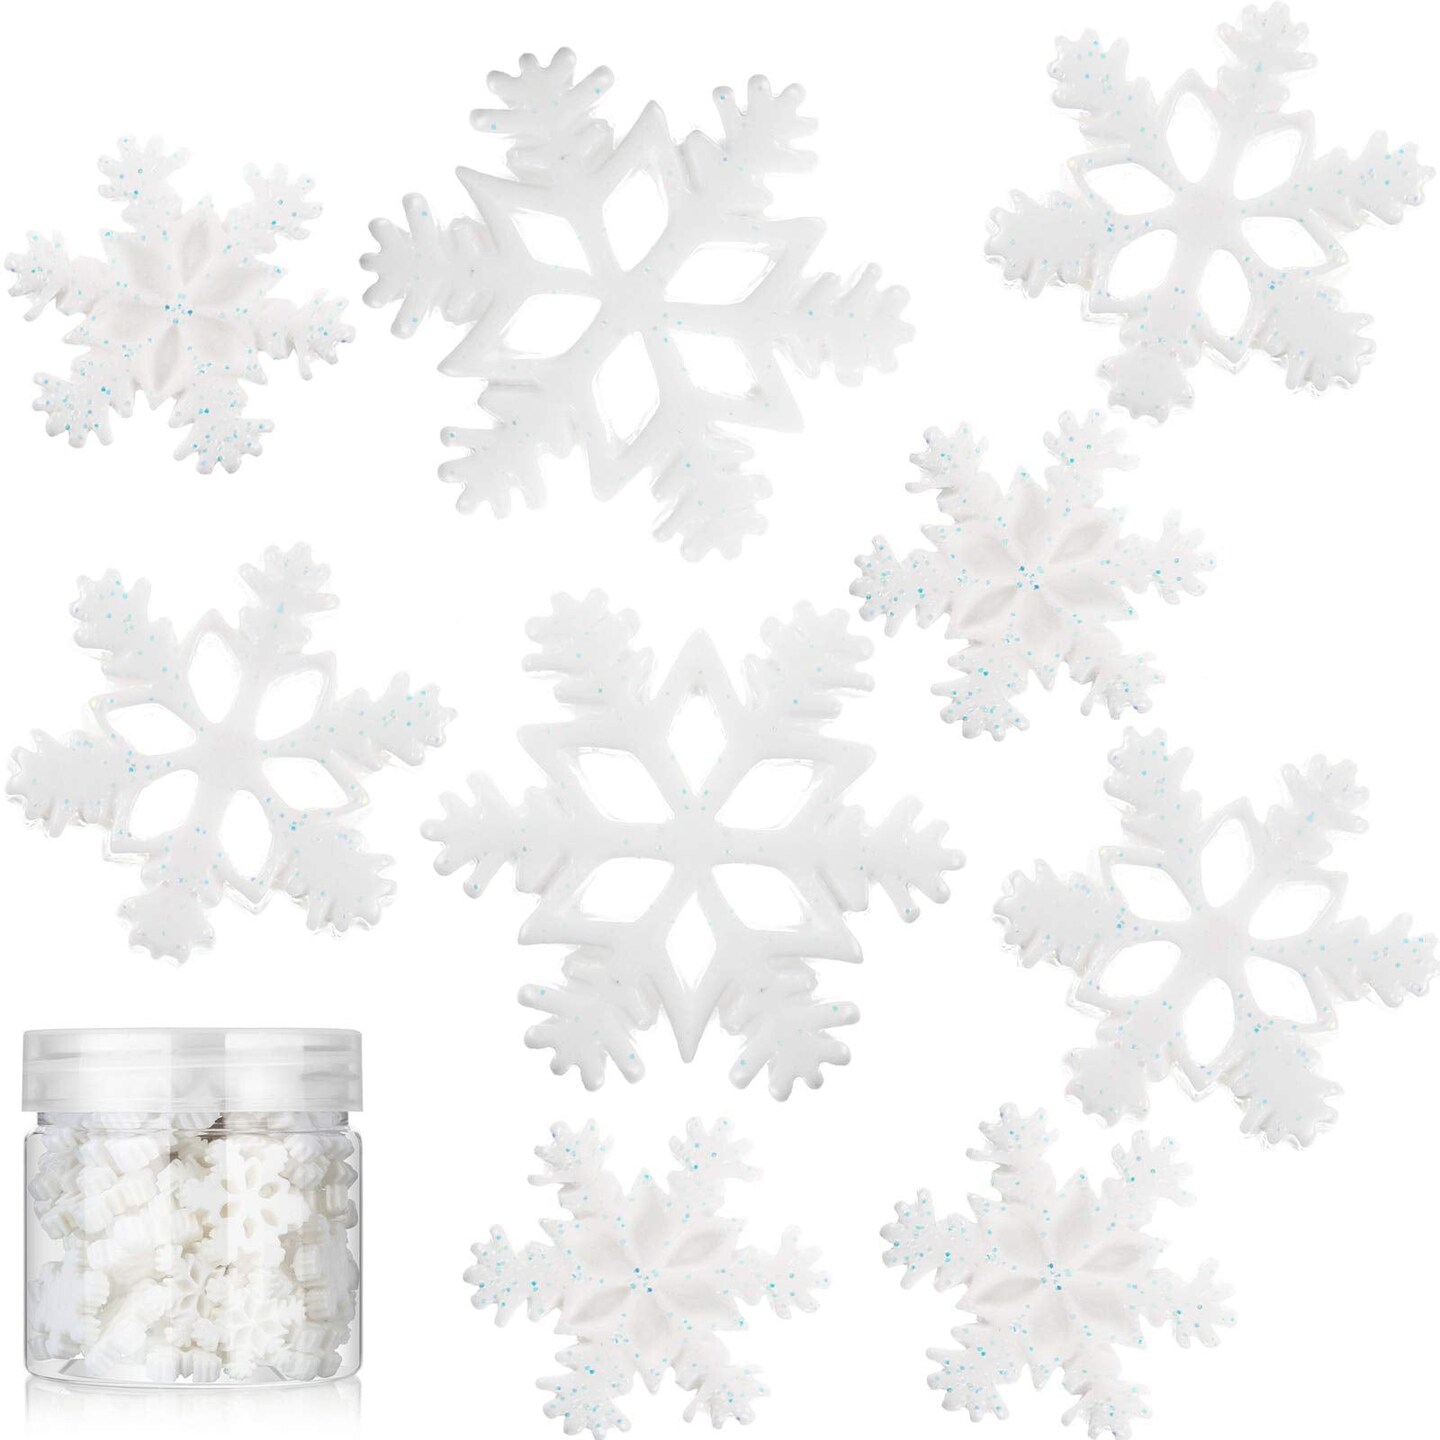 50 Pieces Mini Snowflake for Craft Tiny Resin Small Christmas Embellishment Snow Shaped Craft Decoration with Storage Box for Winter Party DIY Home Decor, 3 Sizes (White)